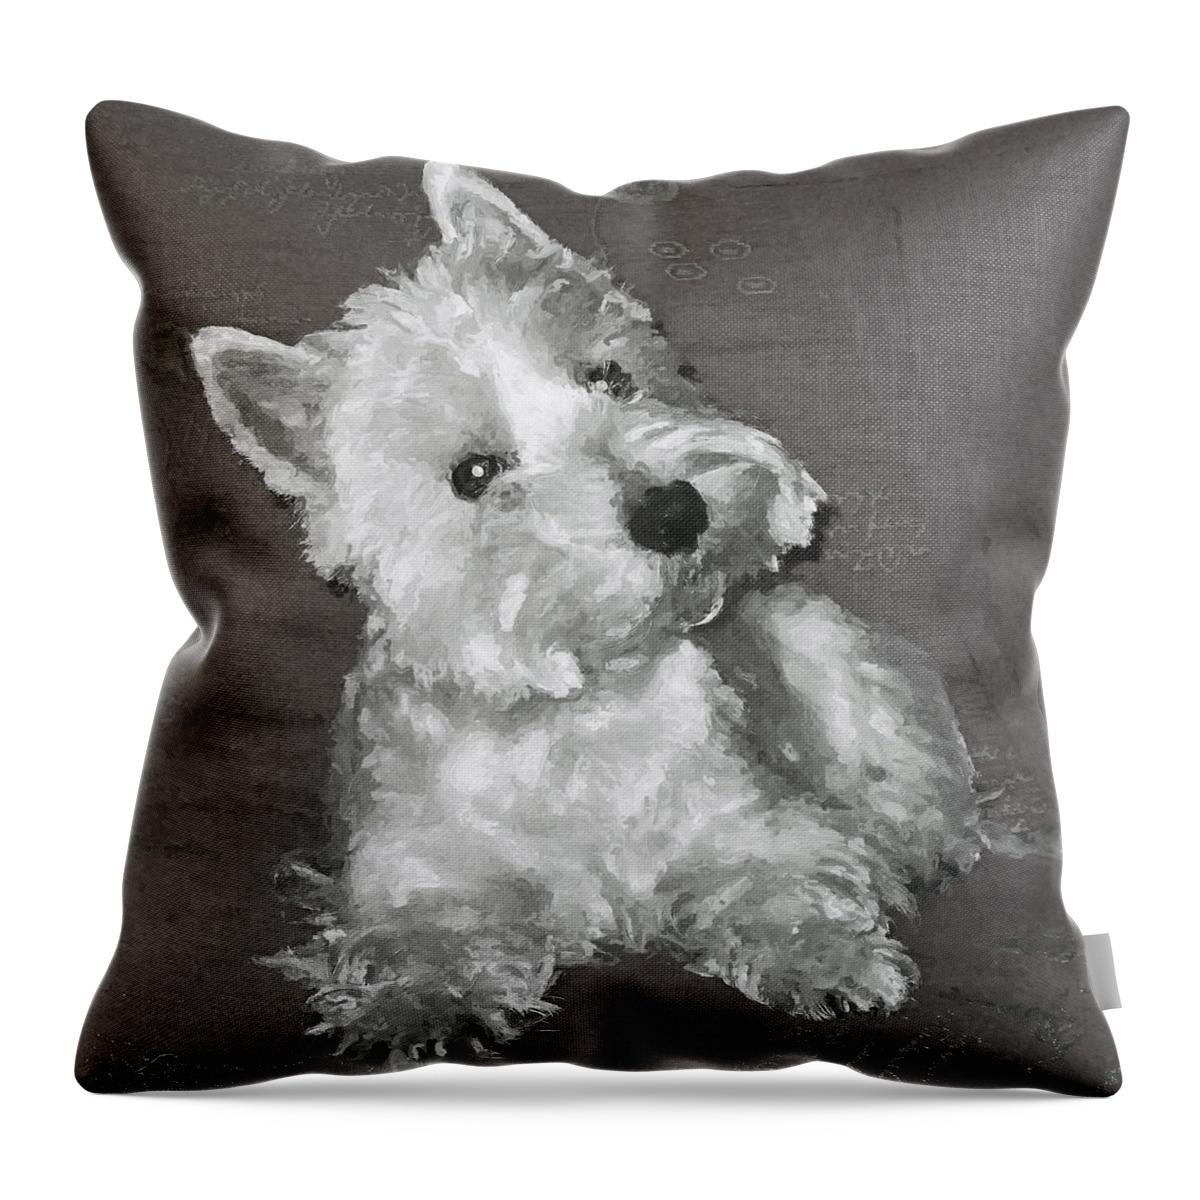 Westie Throw Pillow featuring the digital art West Highland White Terrier by Charmaine Zoe